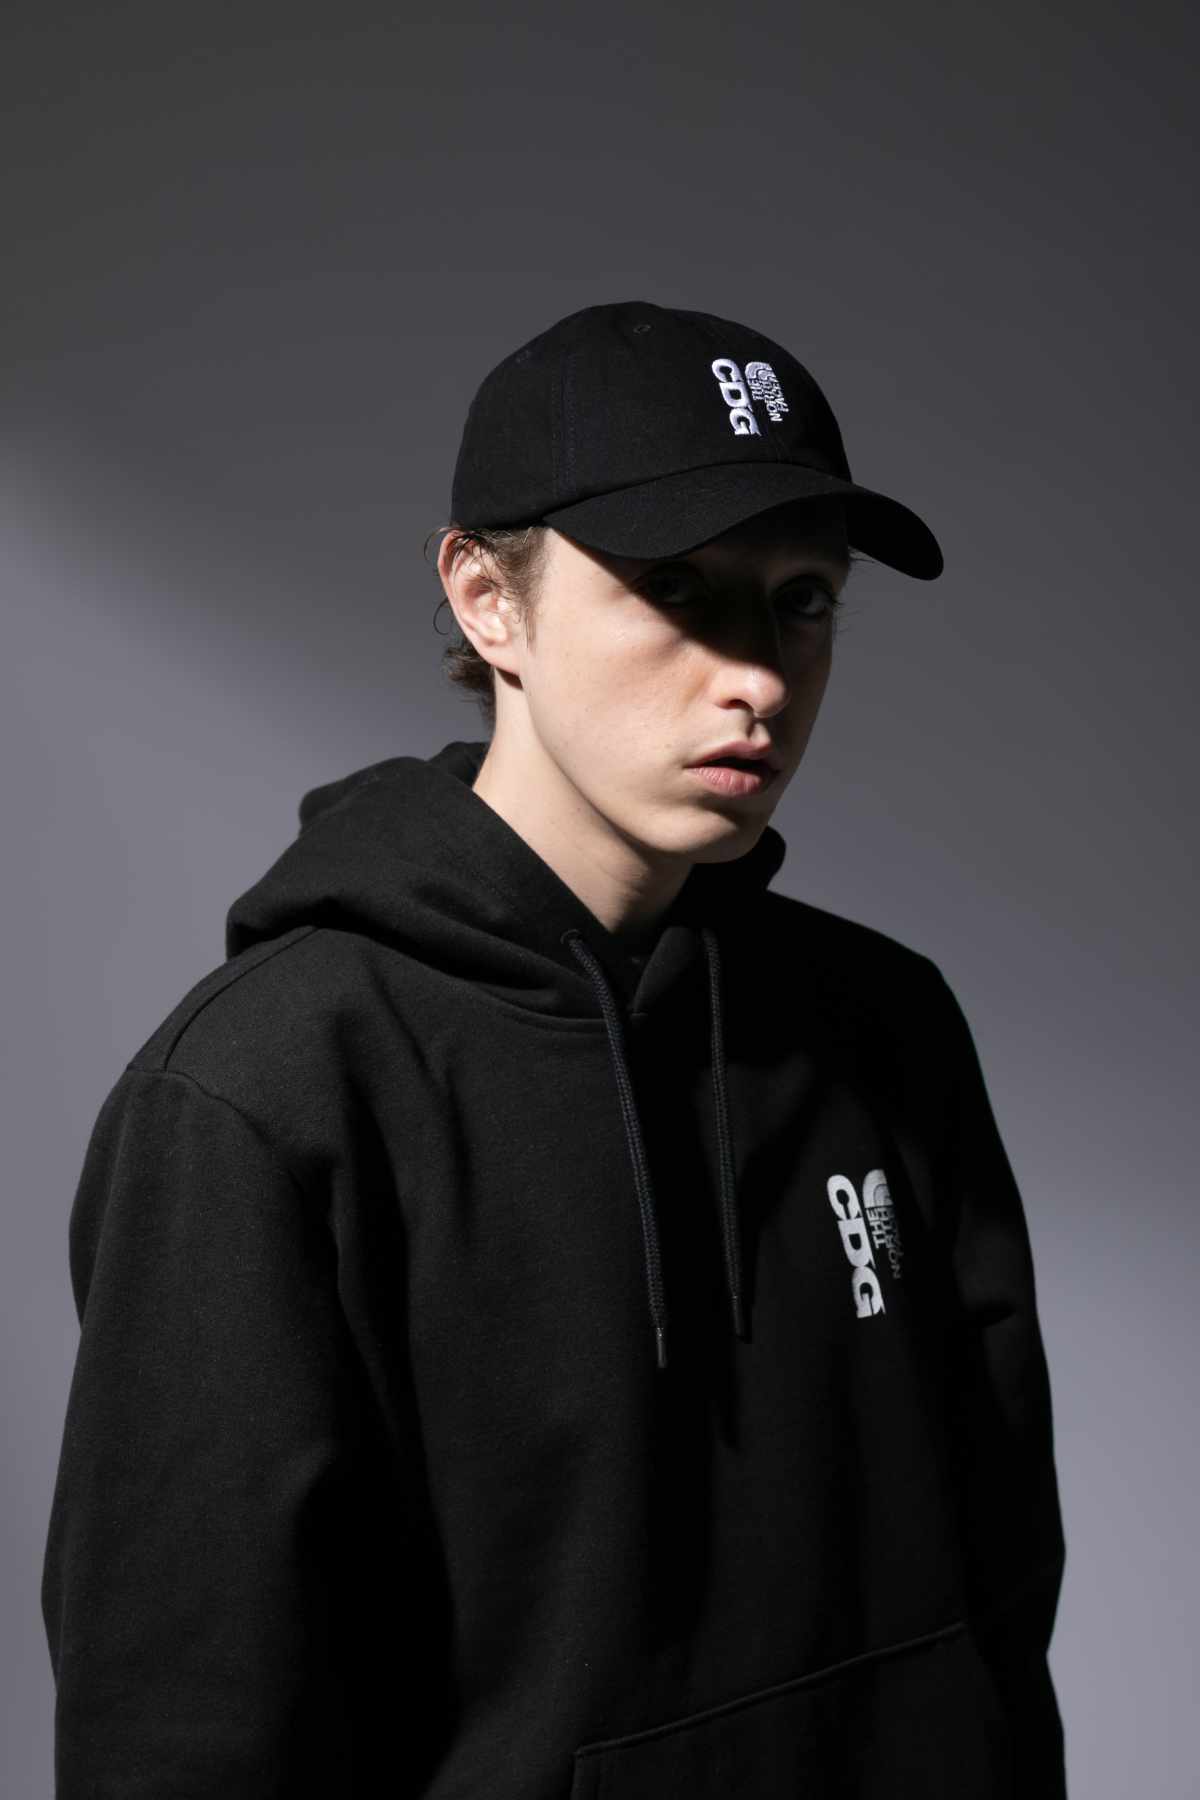 A male model wears the CDG x The North Face collaborative black hat and hoodie sweater